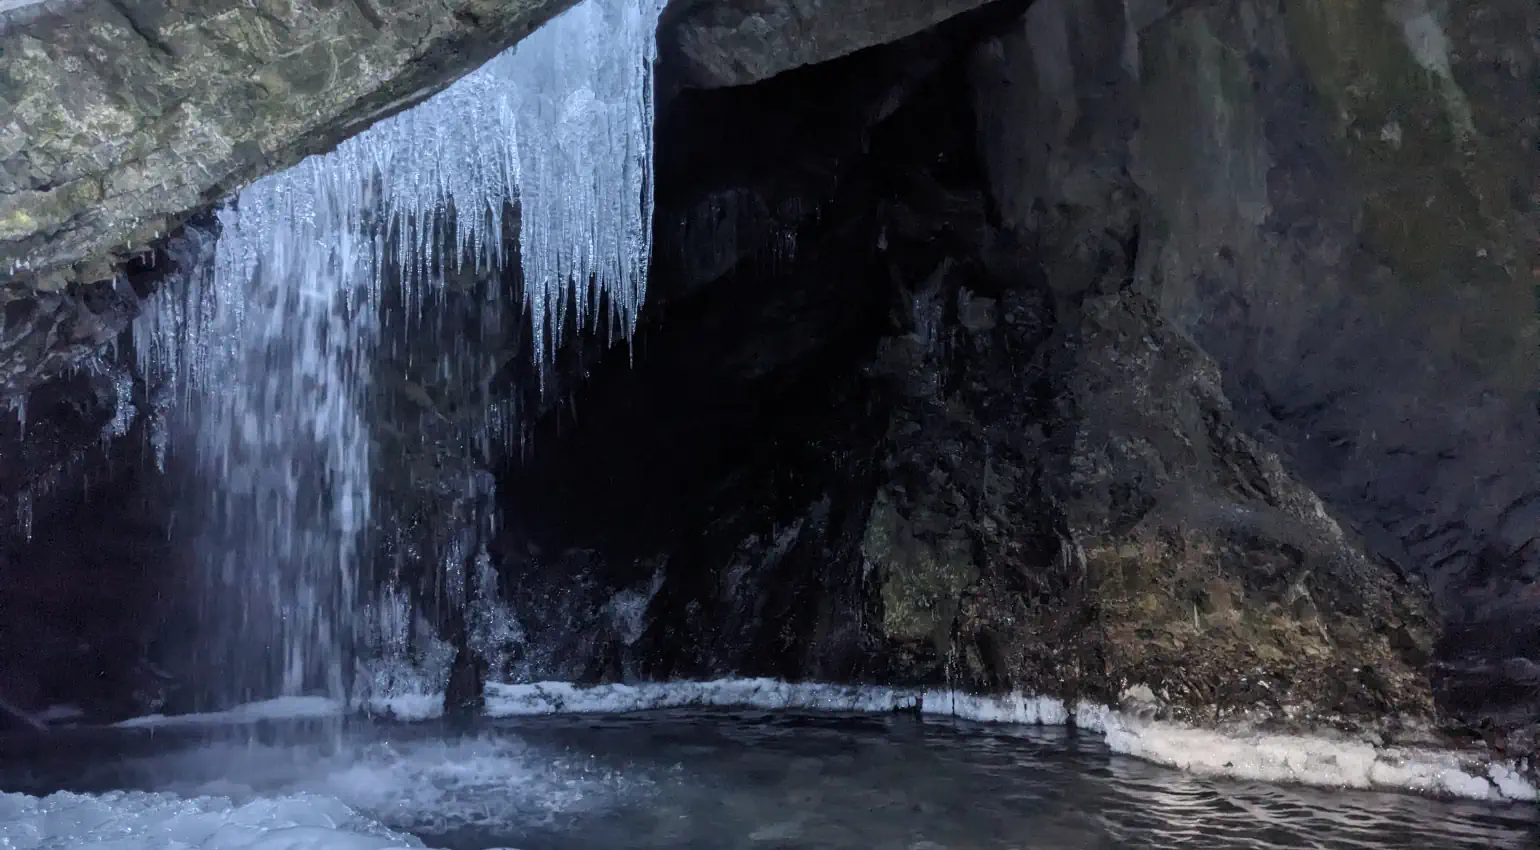 Icicles hang down from the opening of a cave, amid water falling into a pool lined with thick ice. Light from the cave’s opening illuminates the bottom corner of the image, opposite the icicles.